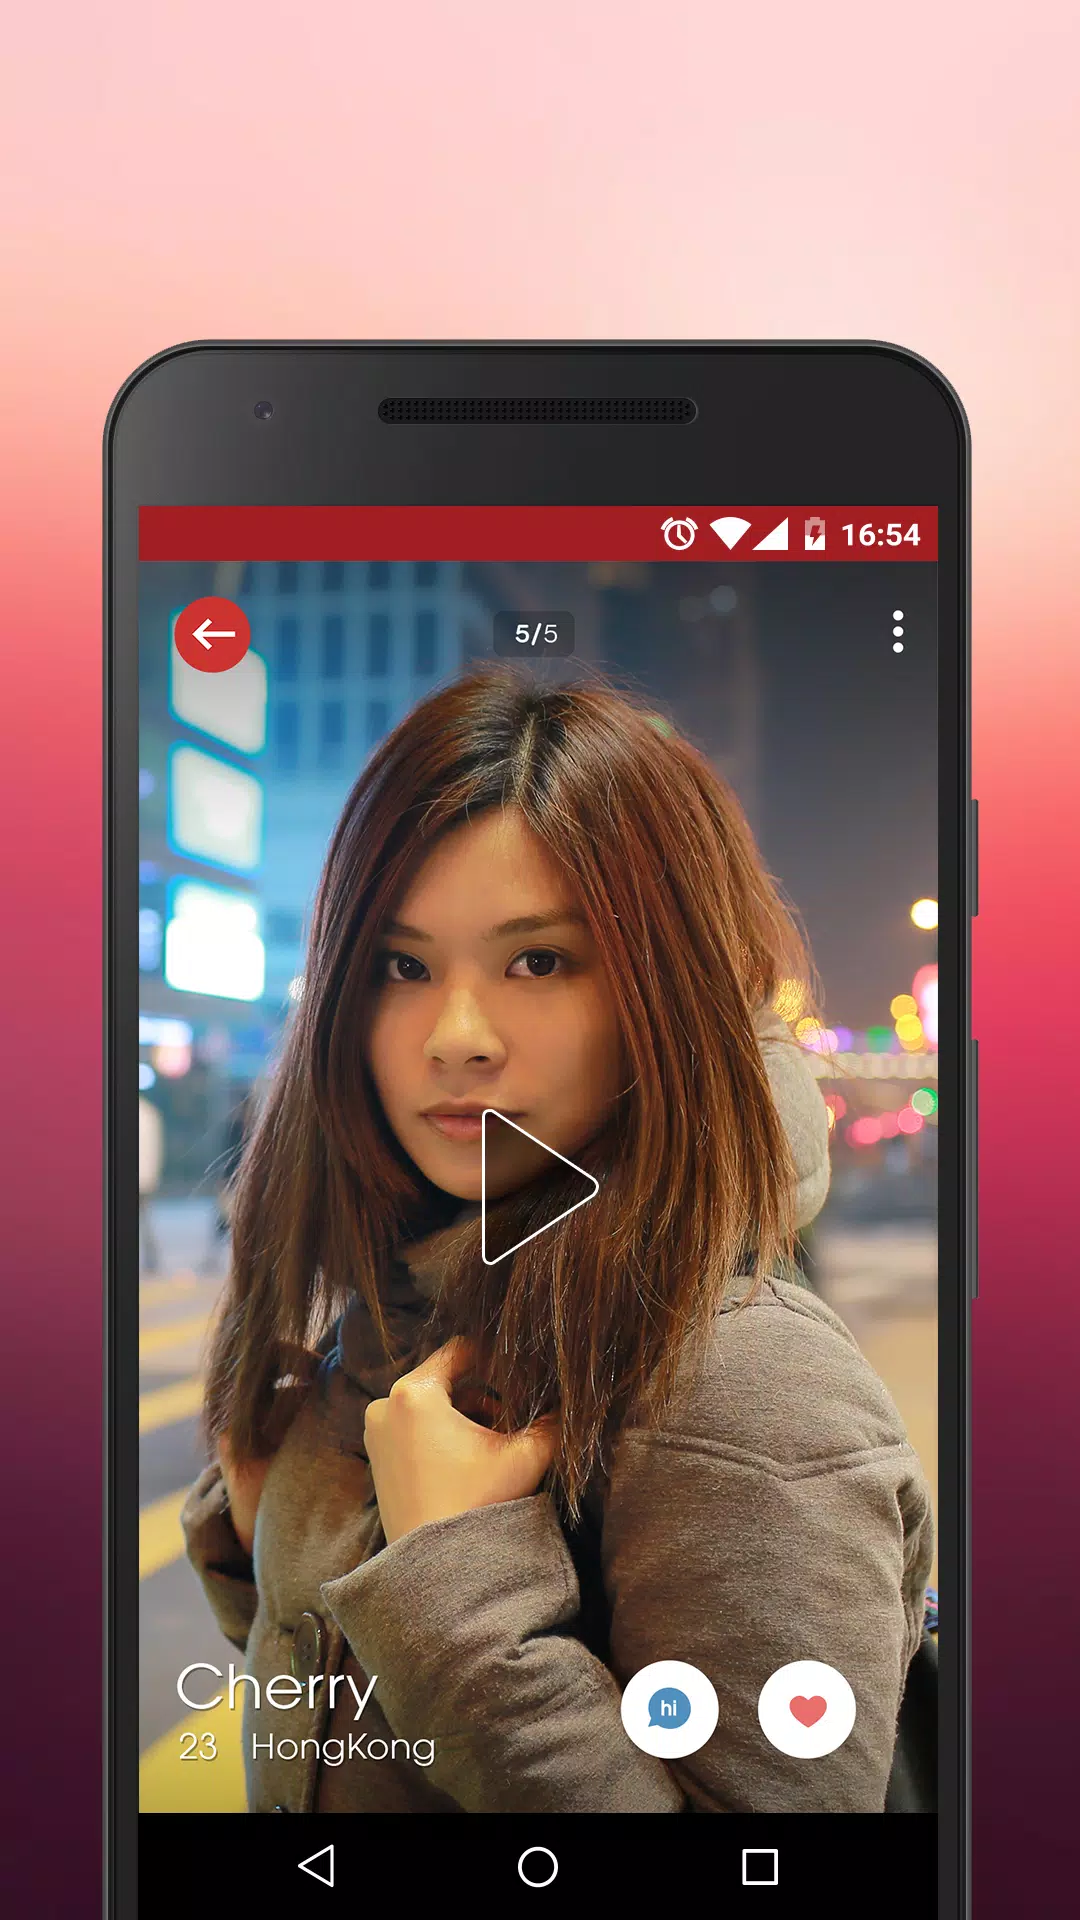 Mobile chat in Hong Kong